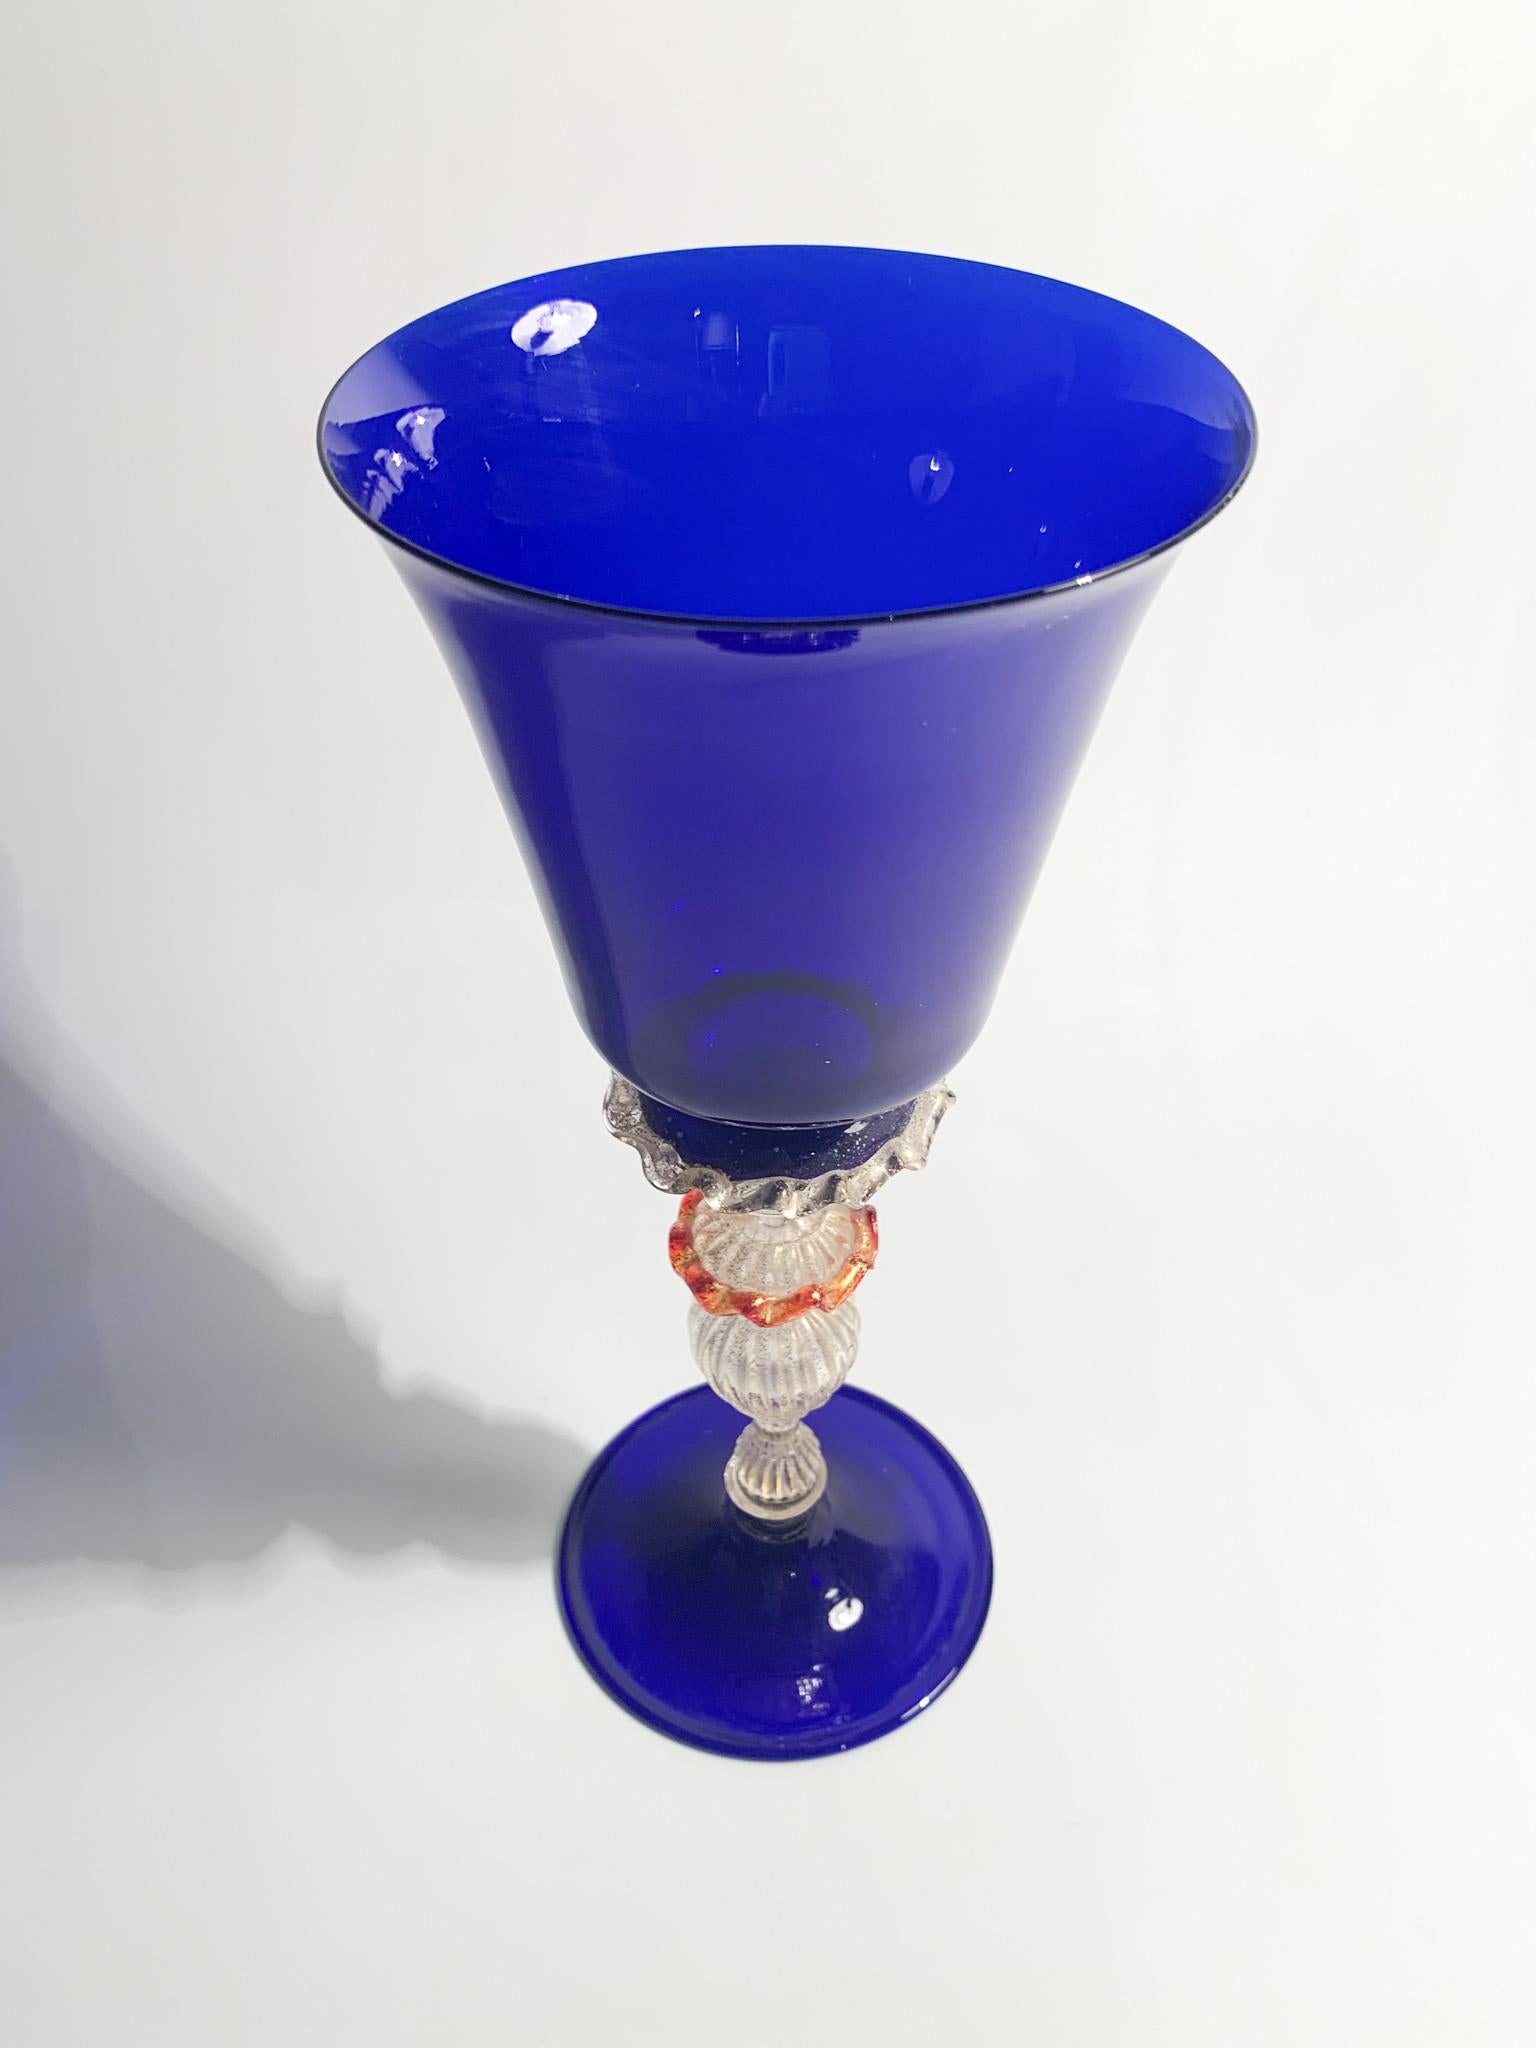 Italian Collector's goblet in hand-blown Murano glass, blue and gold, made in the 1950s

Ø 10 cm h 23 cm